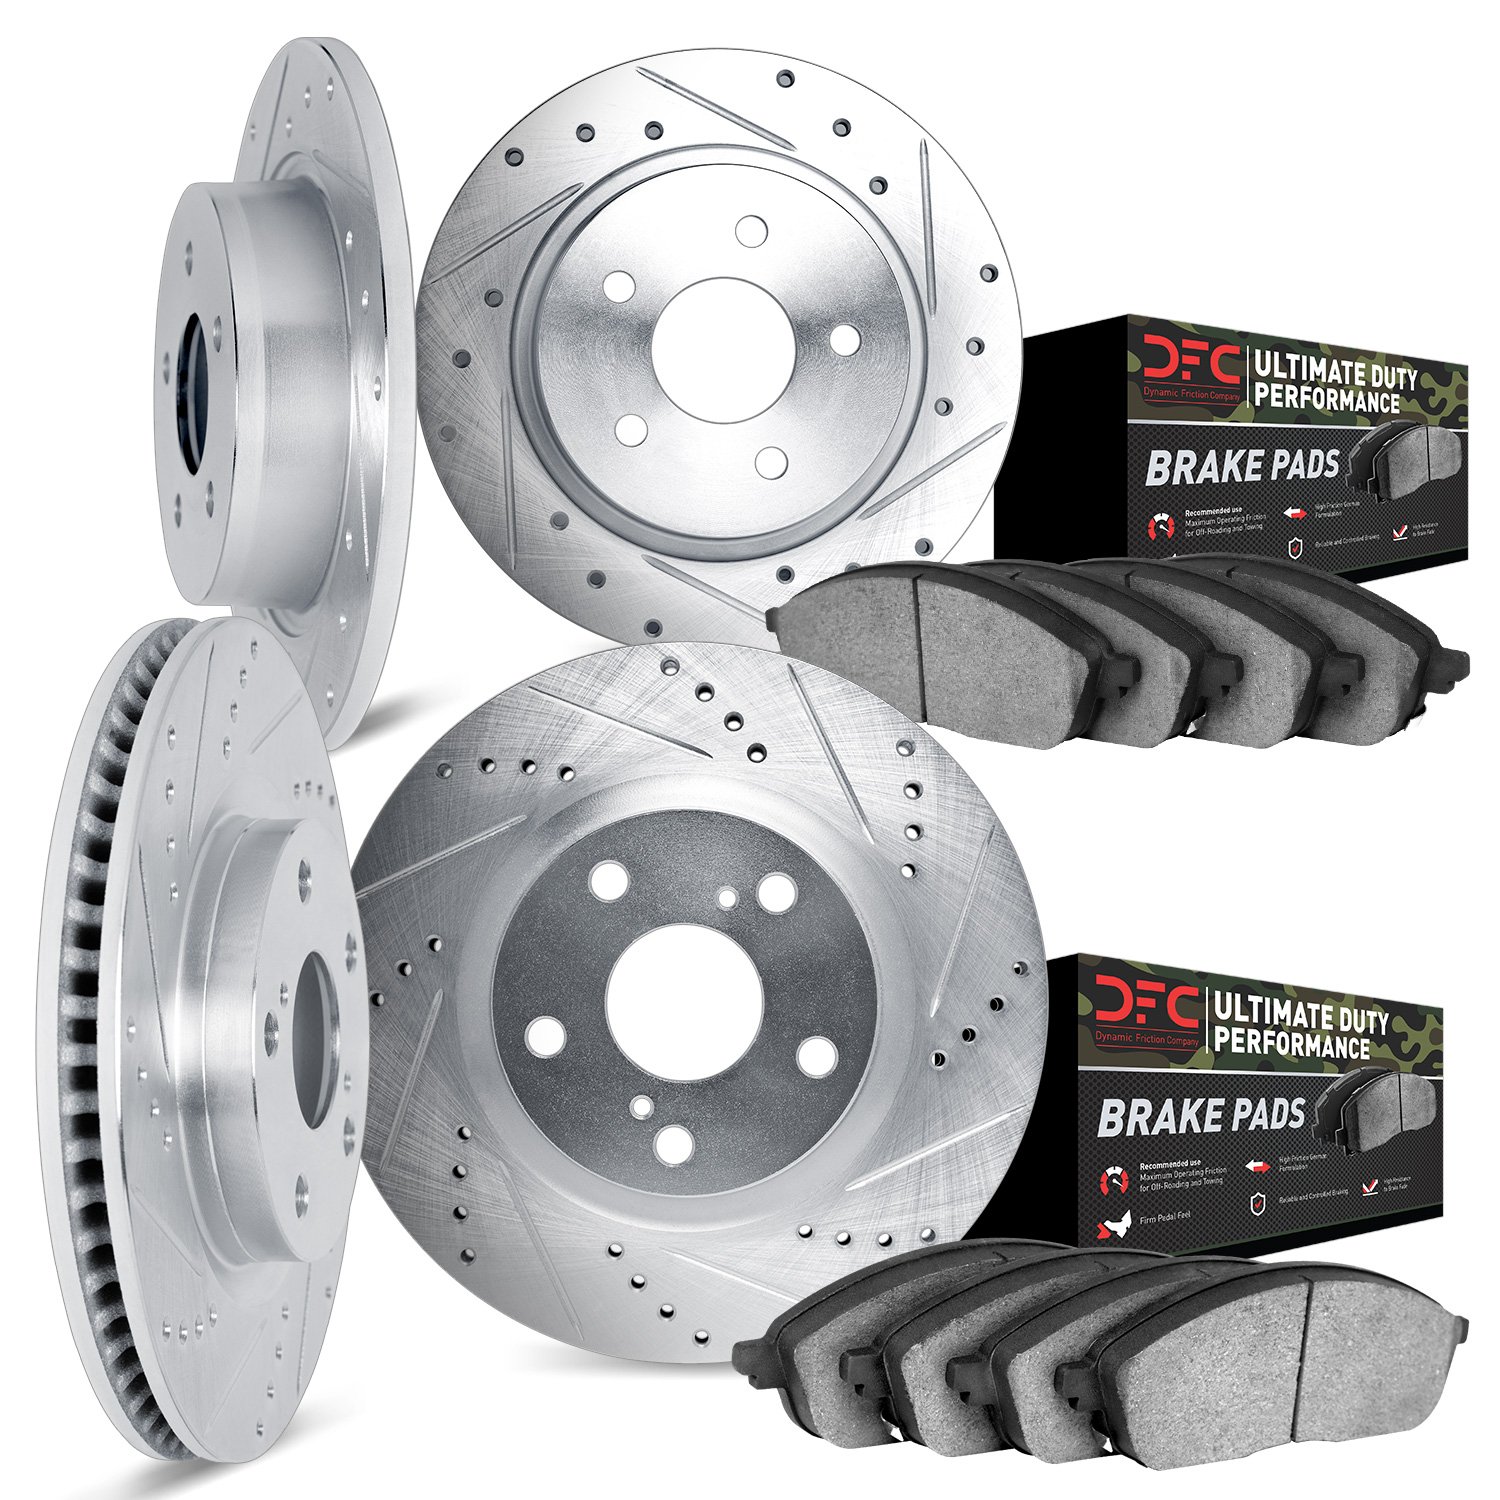 7404-42011 Drilled/Slotted Brake Rotors with Ultimate-Duty Brake Pads Kit [Silver], 1993-1994 Mopar, Position: Front and Rear